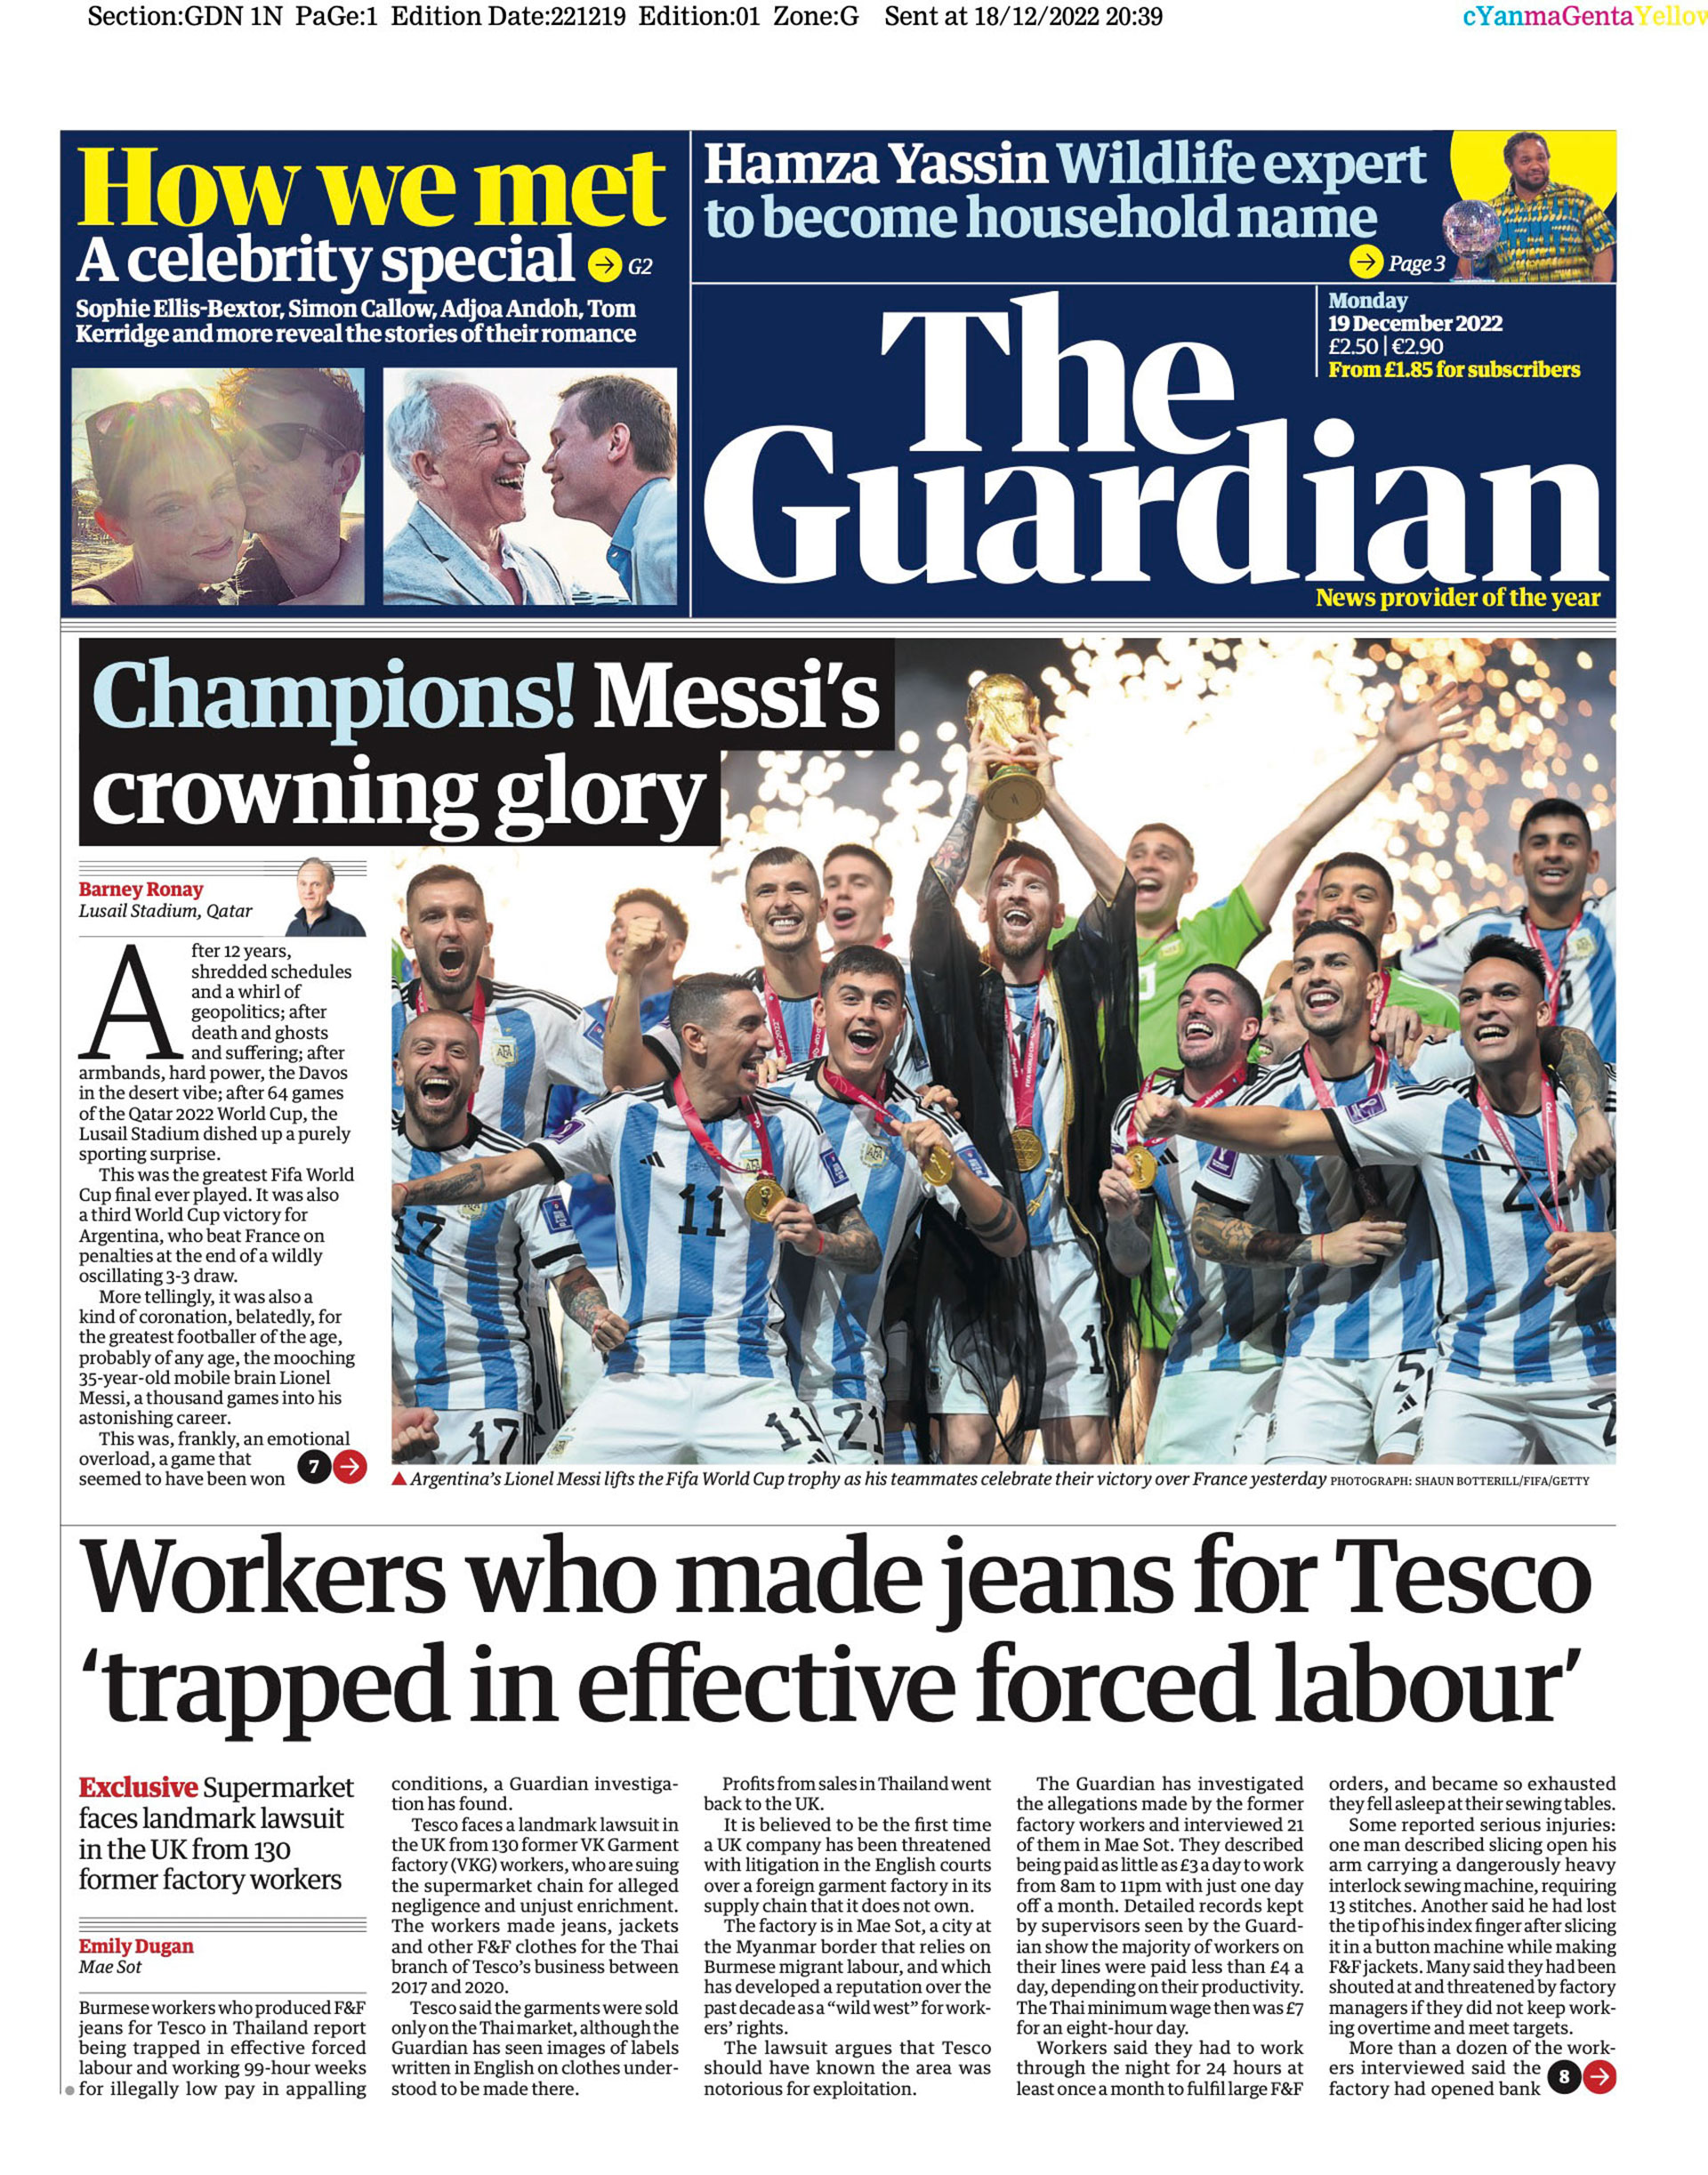 The Guardian cover for this Monday, December 19